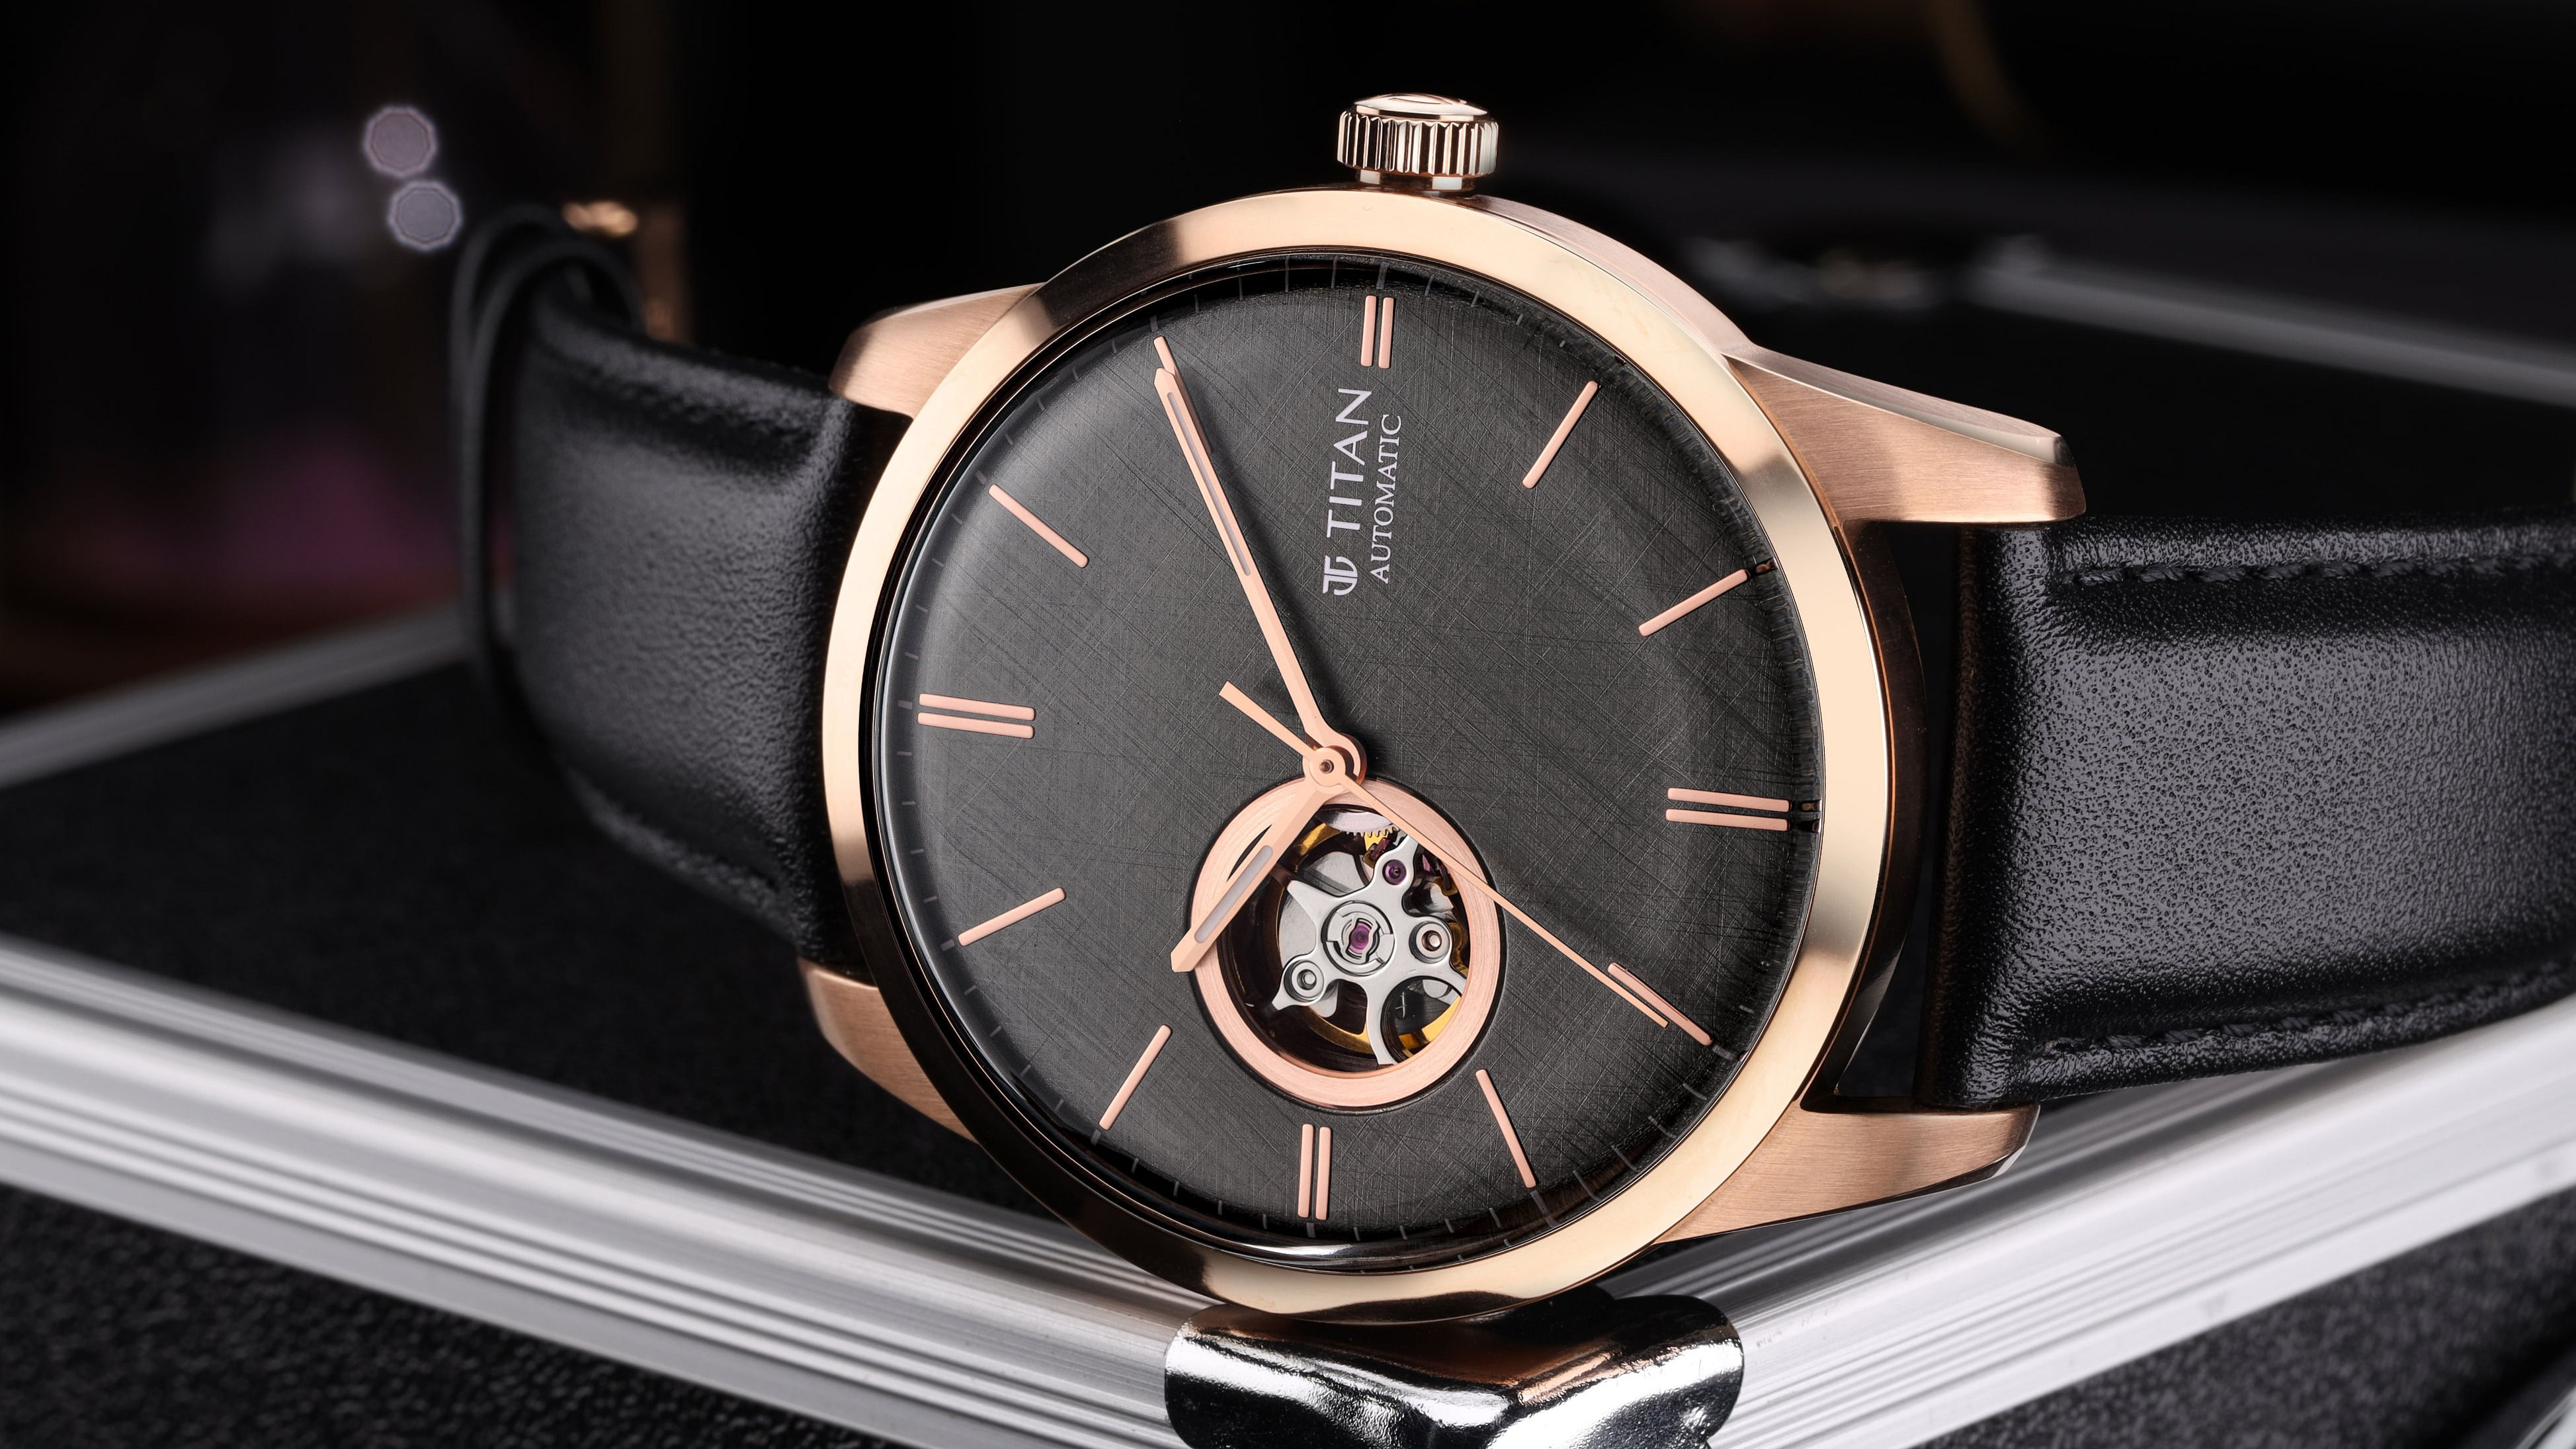 The company's watches and wearables division had a recovery rate of close to 90 per cent for the first two months of the quarter and had flat reported revenue in Q4 compared to last year. Credit: Twitter/ @titanwatches